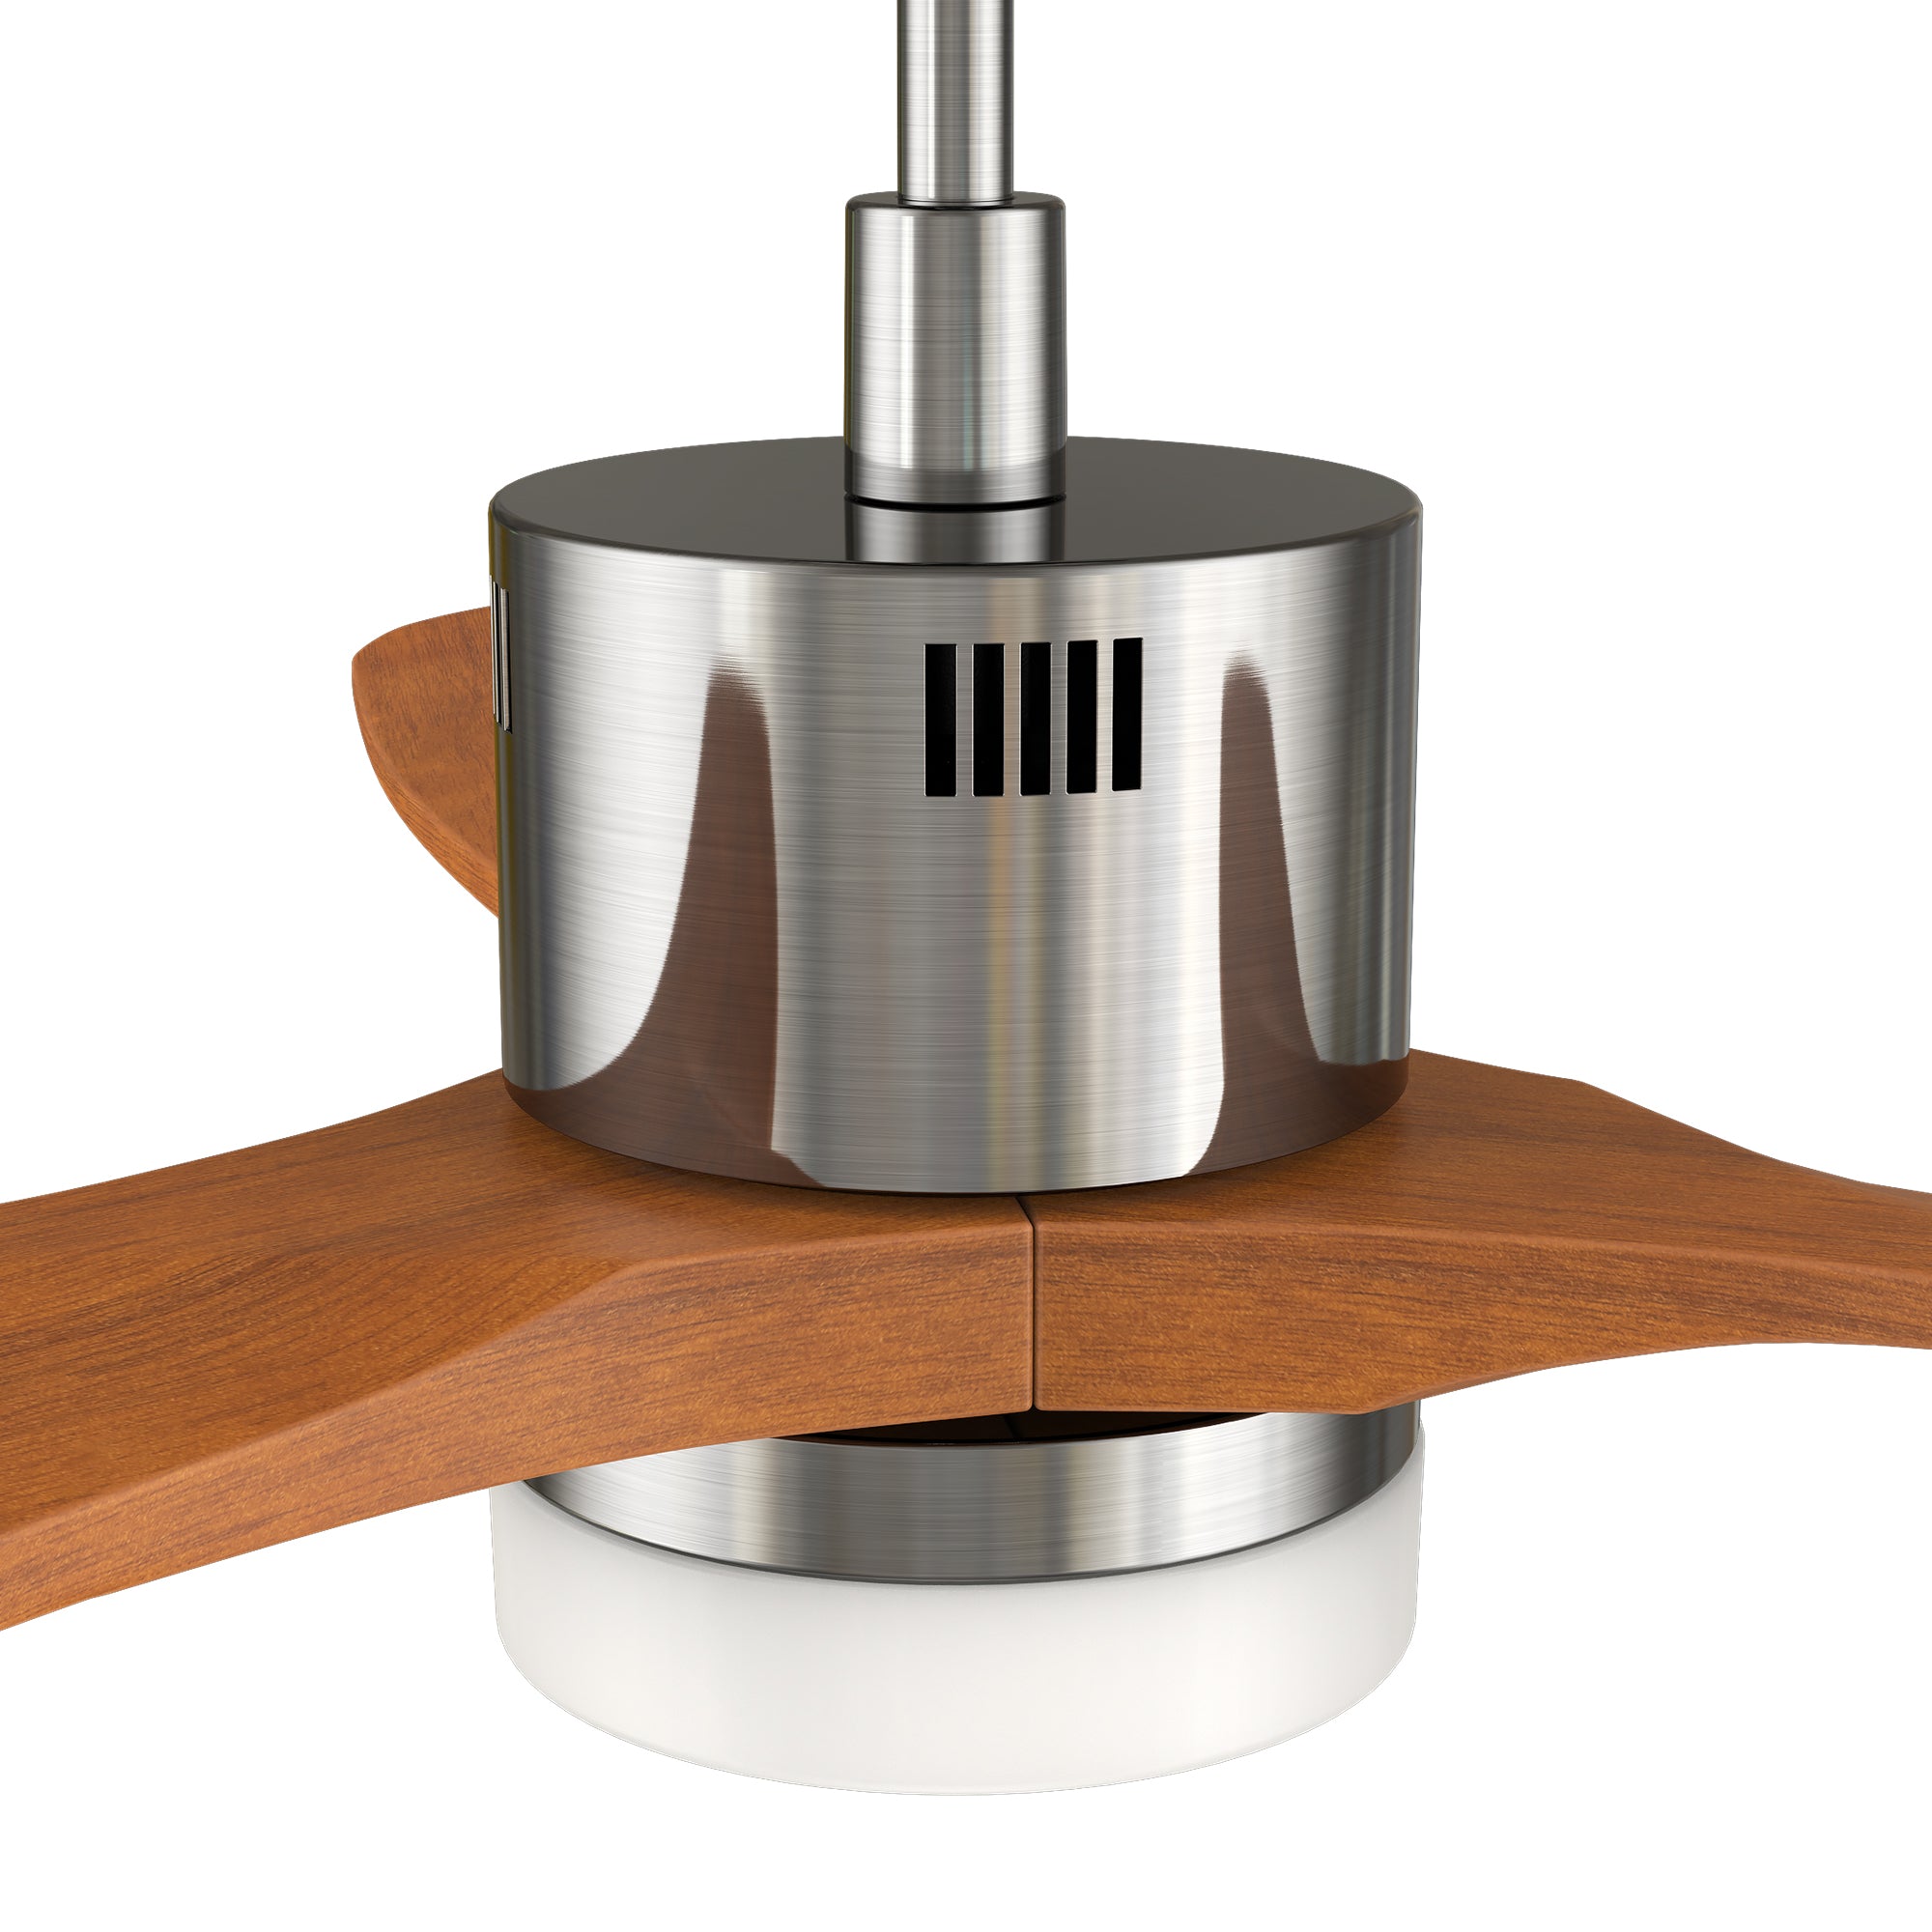 This Eton52'' smart ceiling fan keeps your space cool, bright, and stylish. It is a soft modern masterpiece perfect for your large indoor living spaces. This Wifi smart ceiling fan is a simplicity designing with Silver finish, use elegant Solid Wood blades and has an integrated 4000K LED daylight. The fan features Remote control, Wi-Fi apps, Siri Shortcut and Voice control technology (compatible with Amazon Alexa and Google Home Assistant ) to set fan preferences.